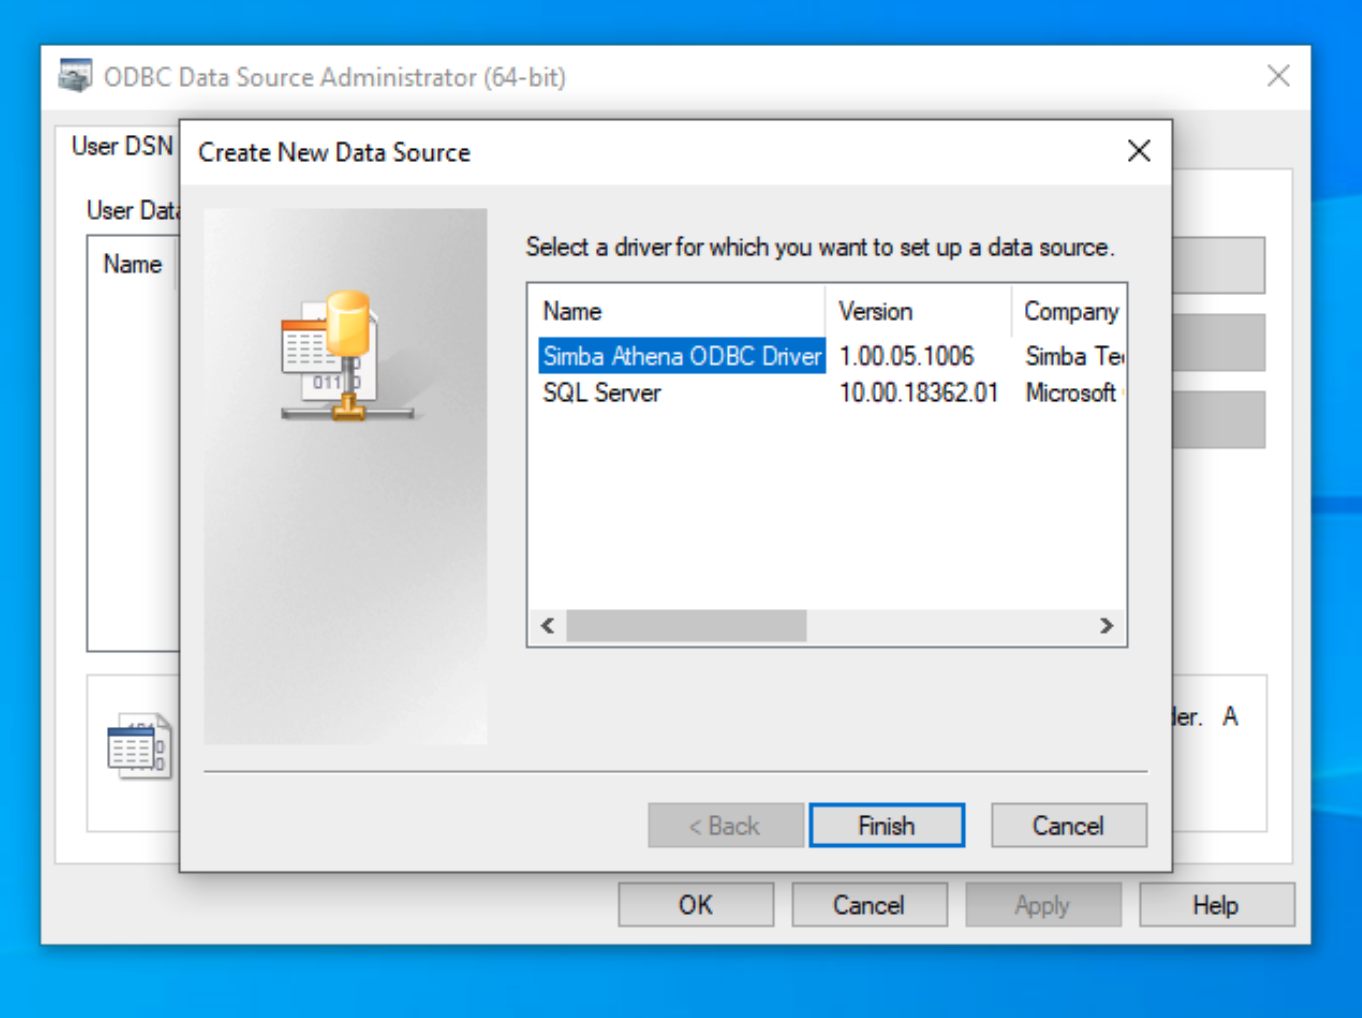 Create new data source modal with Simba Athena ODBC Driver selected